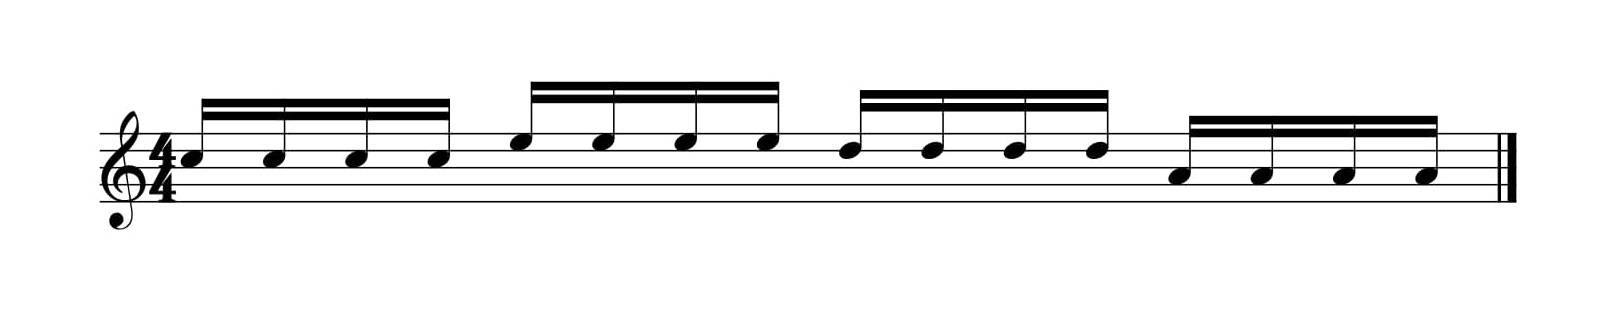 a basic drum fill in drum sheet music